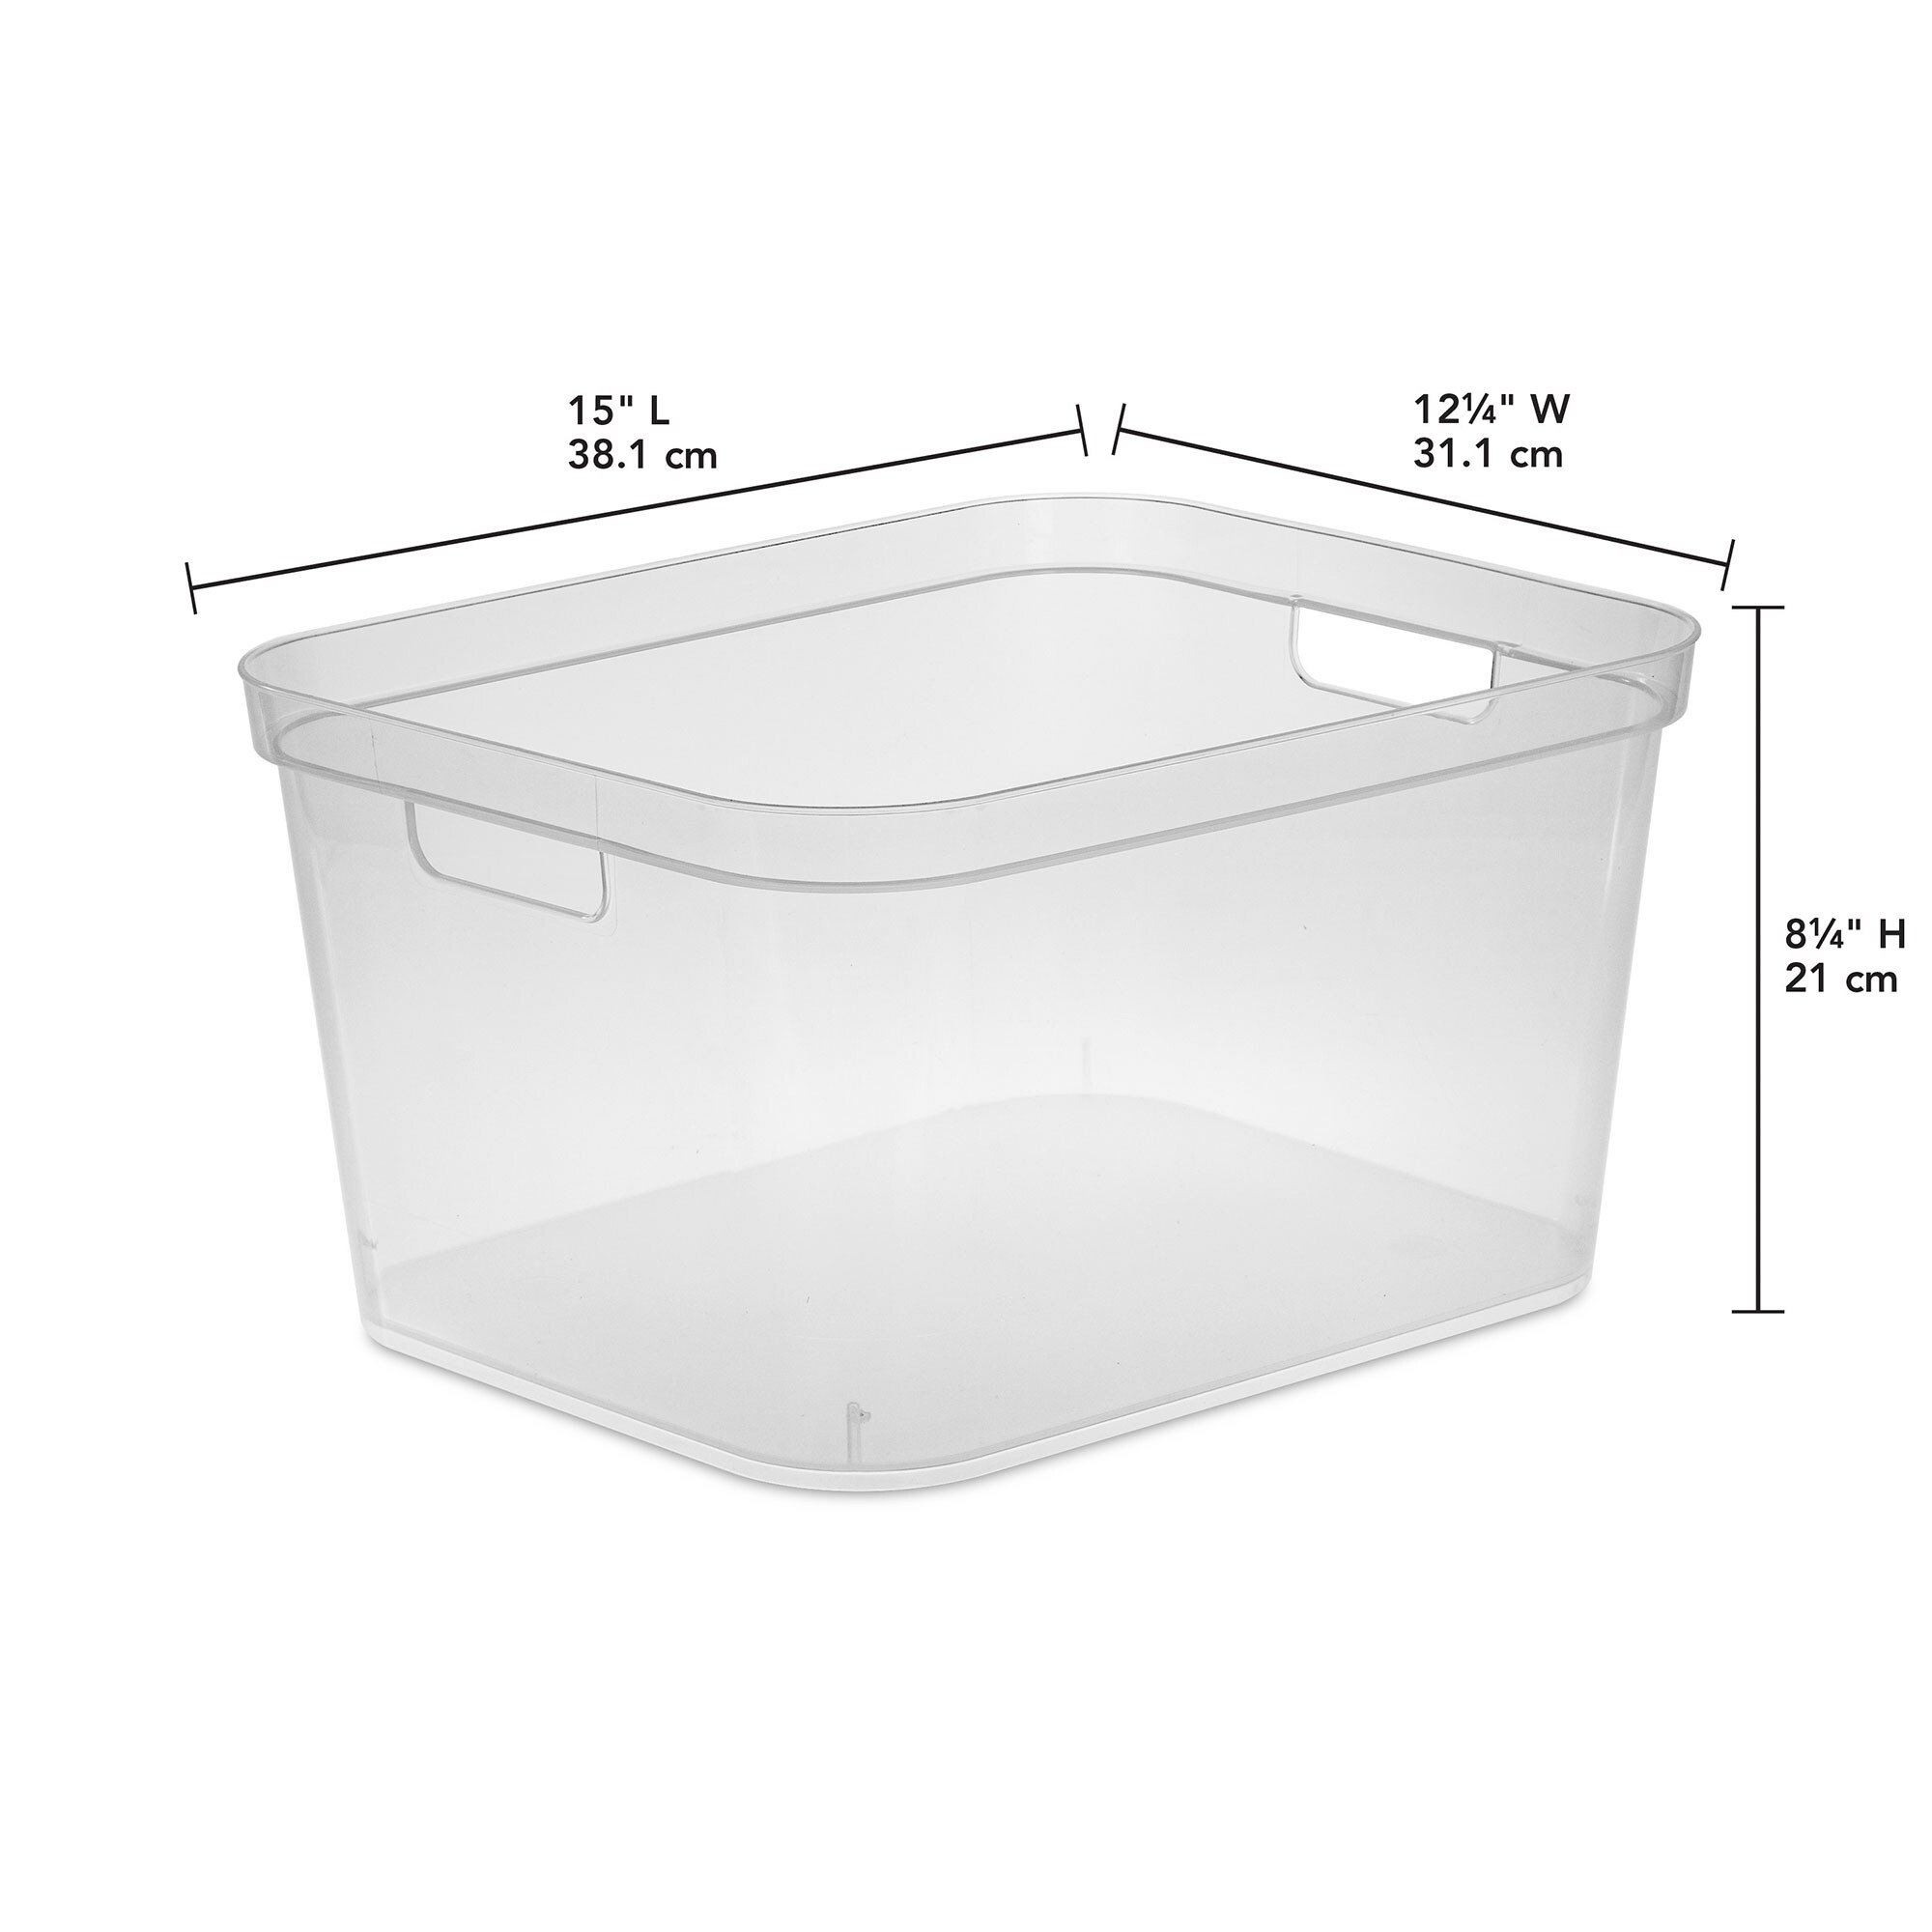 Sterilite 9.5 x 6.5 x 4 inch Clear Open Storage Bin with Carry Handles (48 Pack)